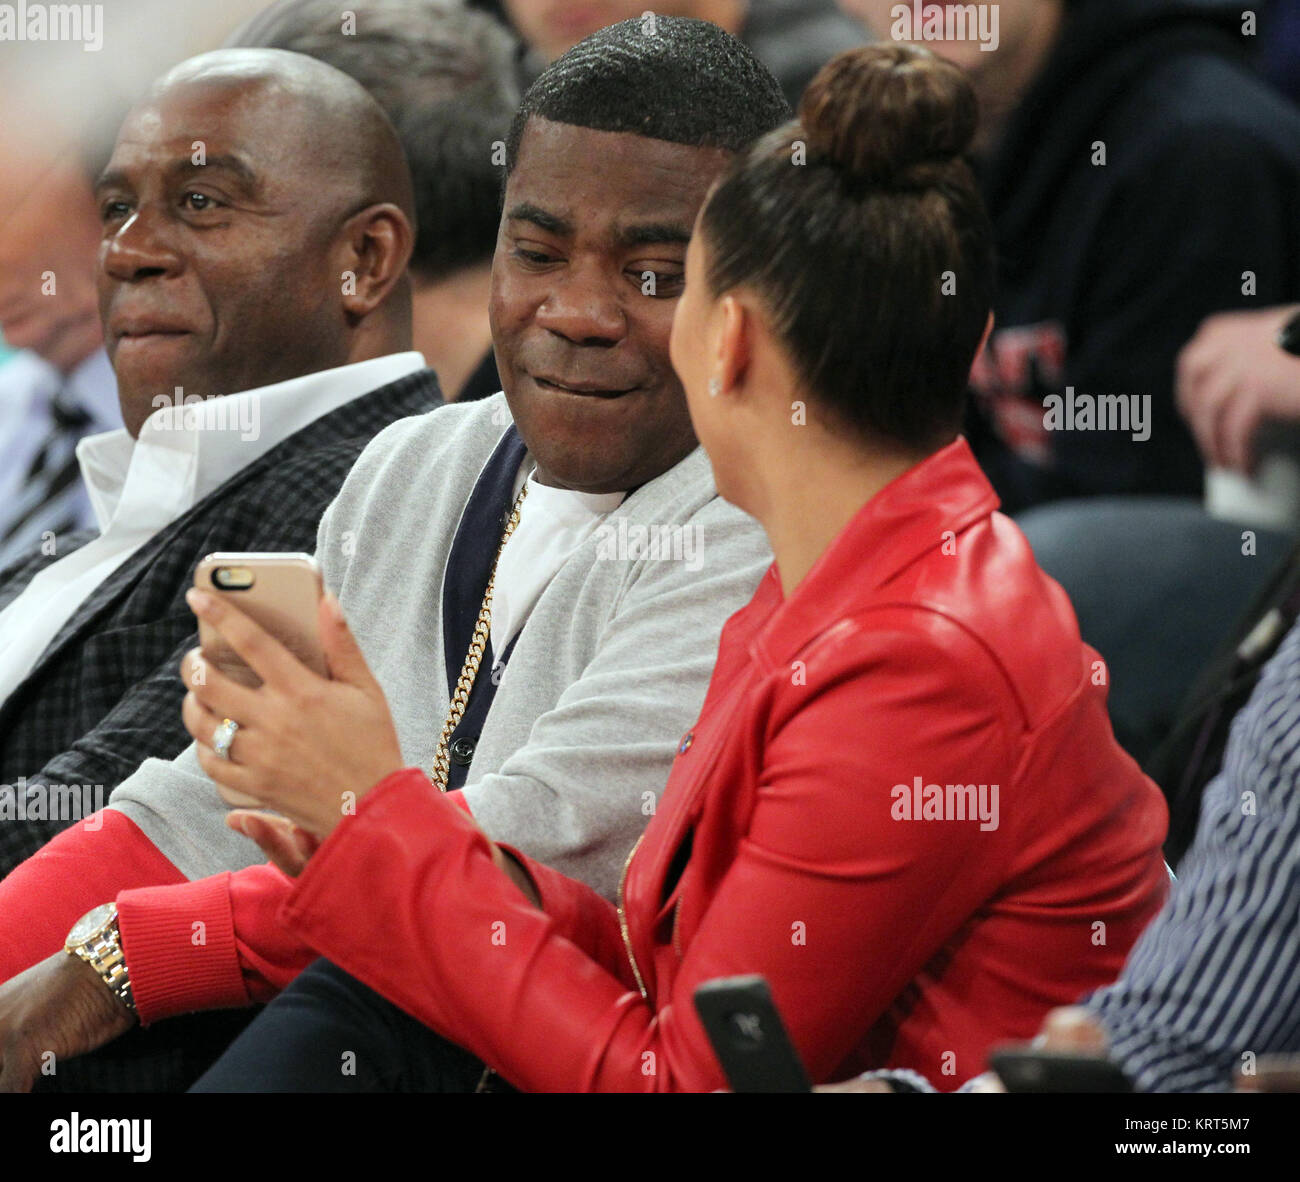 NEW YORK, NY - NOVEMBER 08: (Embargoed till November 10, 2015) Magic Johnson, Tracy Morgan with wife Megan Wollover sit with Michael K. Williams and  Director Spike Lee at the New York Knicks vs Los Angeles Lakers game at Madison Square Garden on November 8, 2015 in New York City.   People:  Tracy Morgan, Megan Wollover Stock Photo